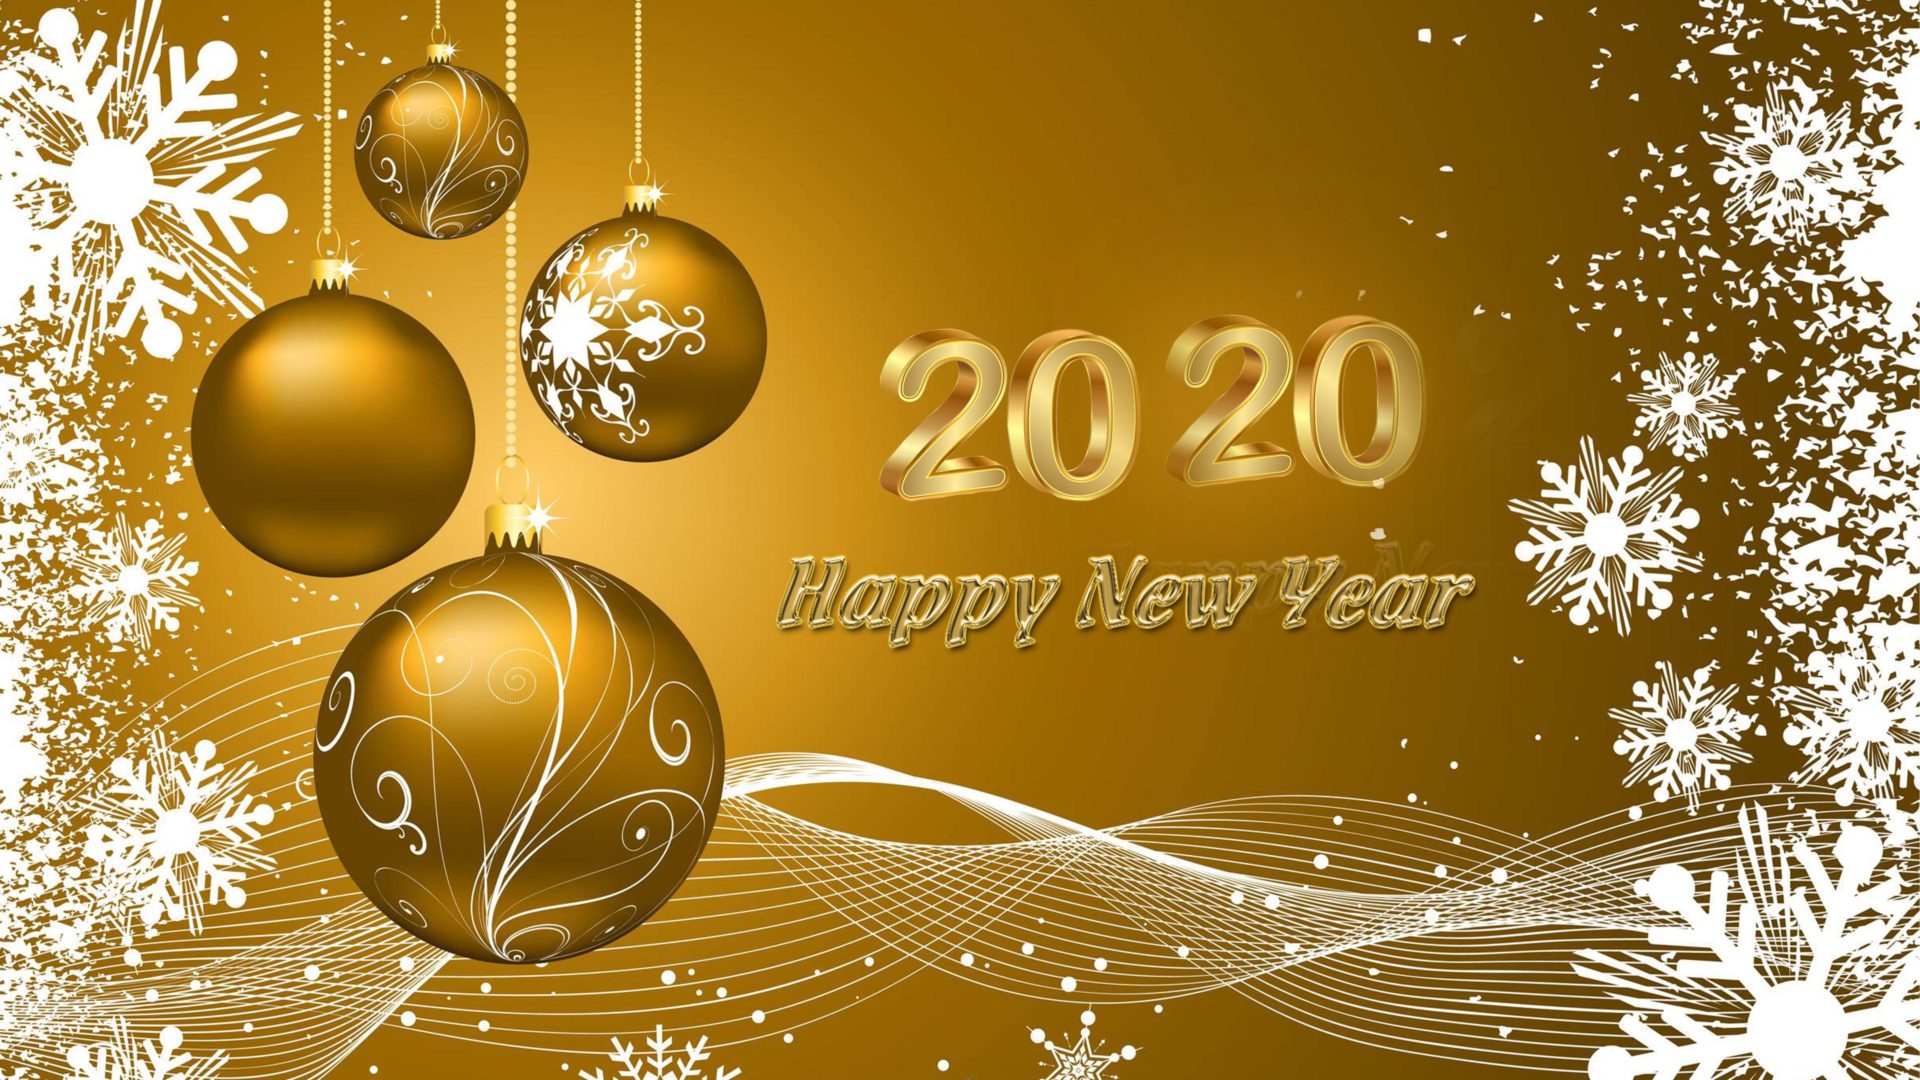 Happy New 2020 Year Wishes Gold Greeting Card Quotes 4k Ultrahd